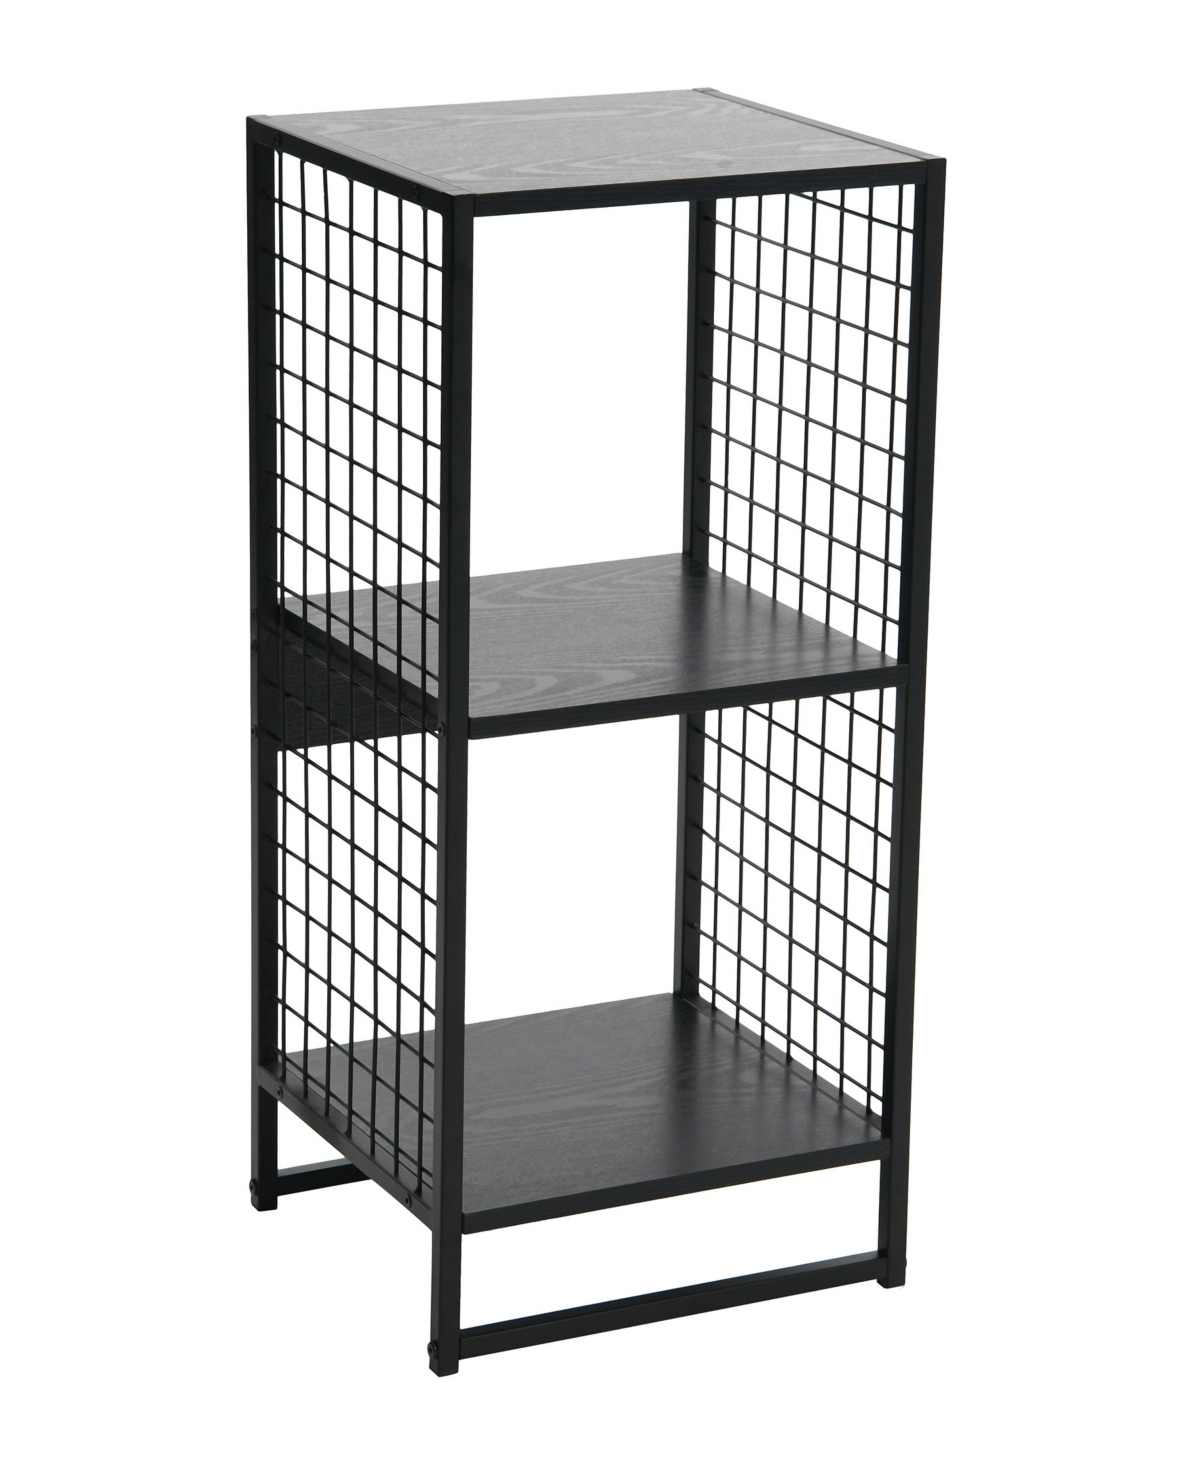 Household Essentials Cube Wall Shelves With 2 Cubes In Black